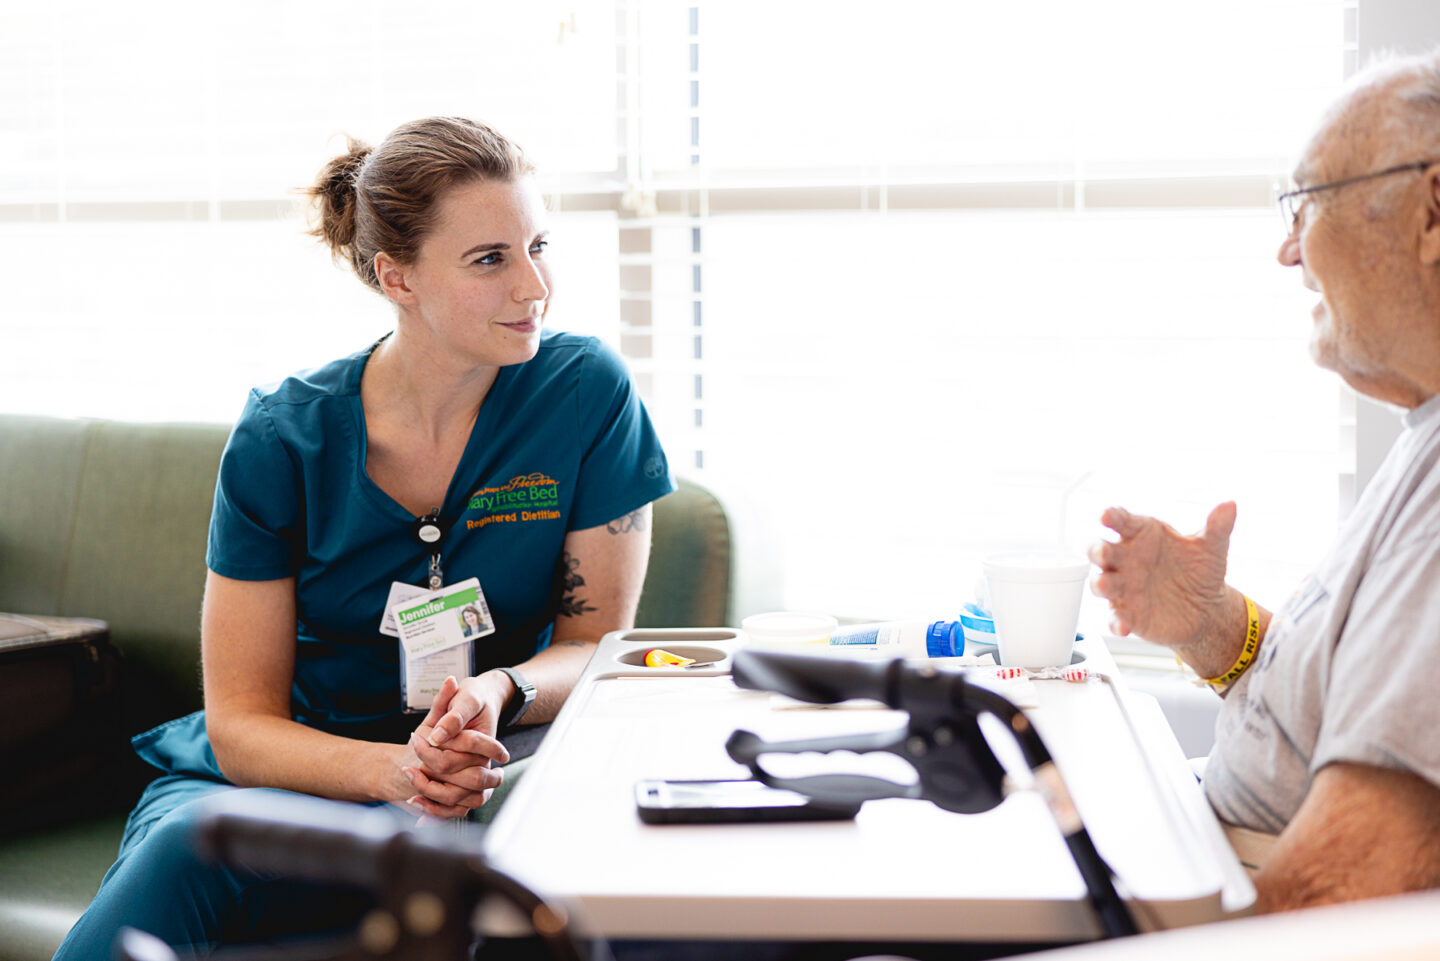 Jenn, a Mary Free Bed Registered dietitian, speaks with a patient in his hospital room